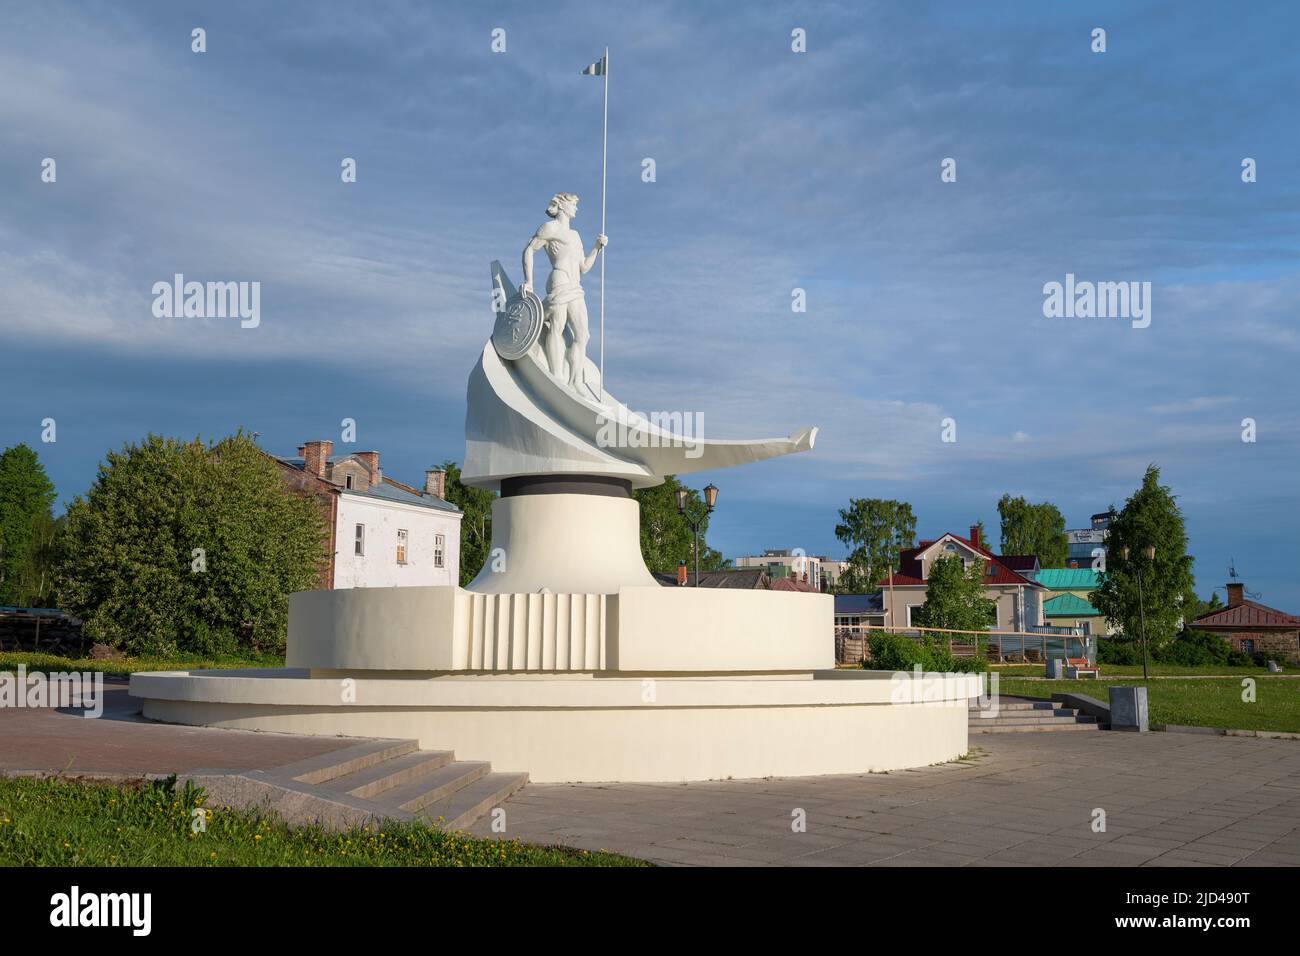 PETROZAVODSK, RUSSIA - JUNE 12, 2022: Onego (Birth of Petrozavodsk) sculpture on a sunny June day Stock Photo